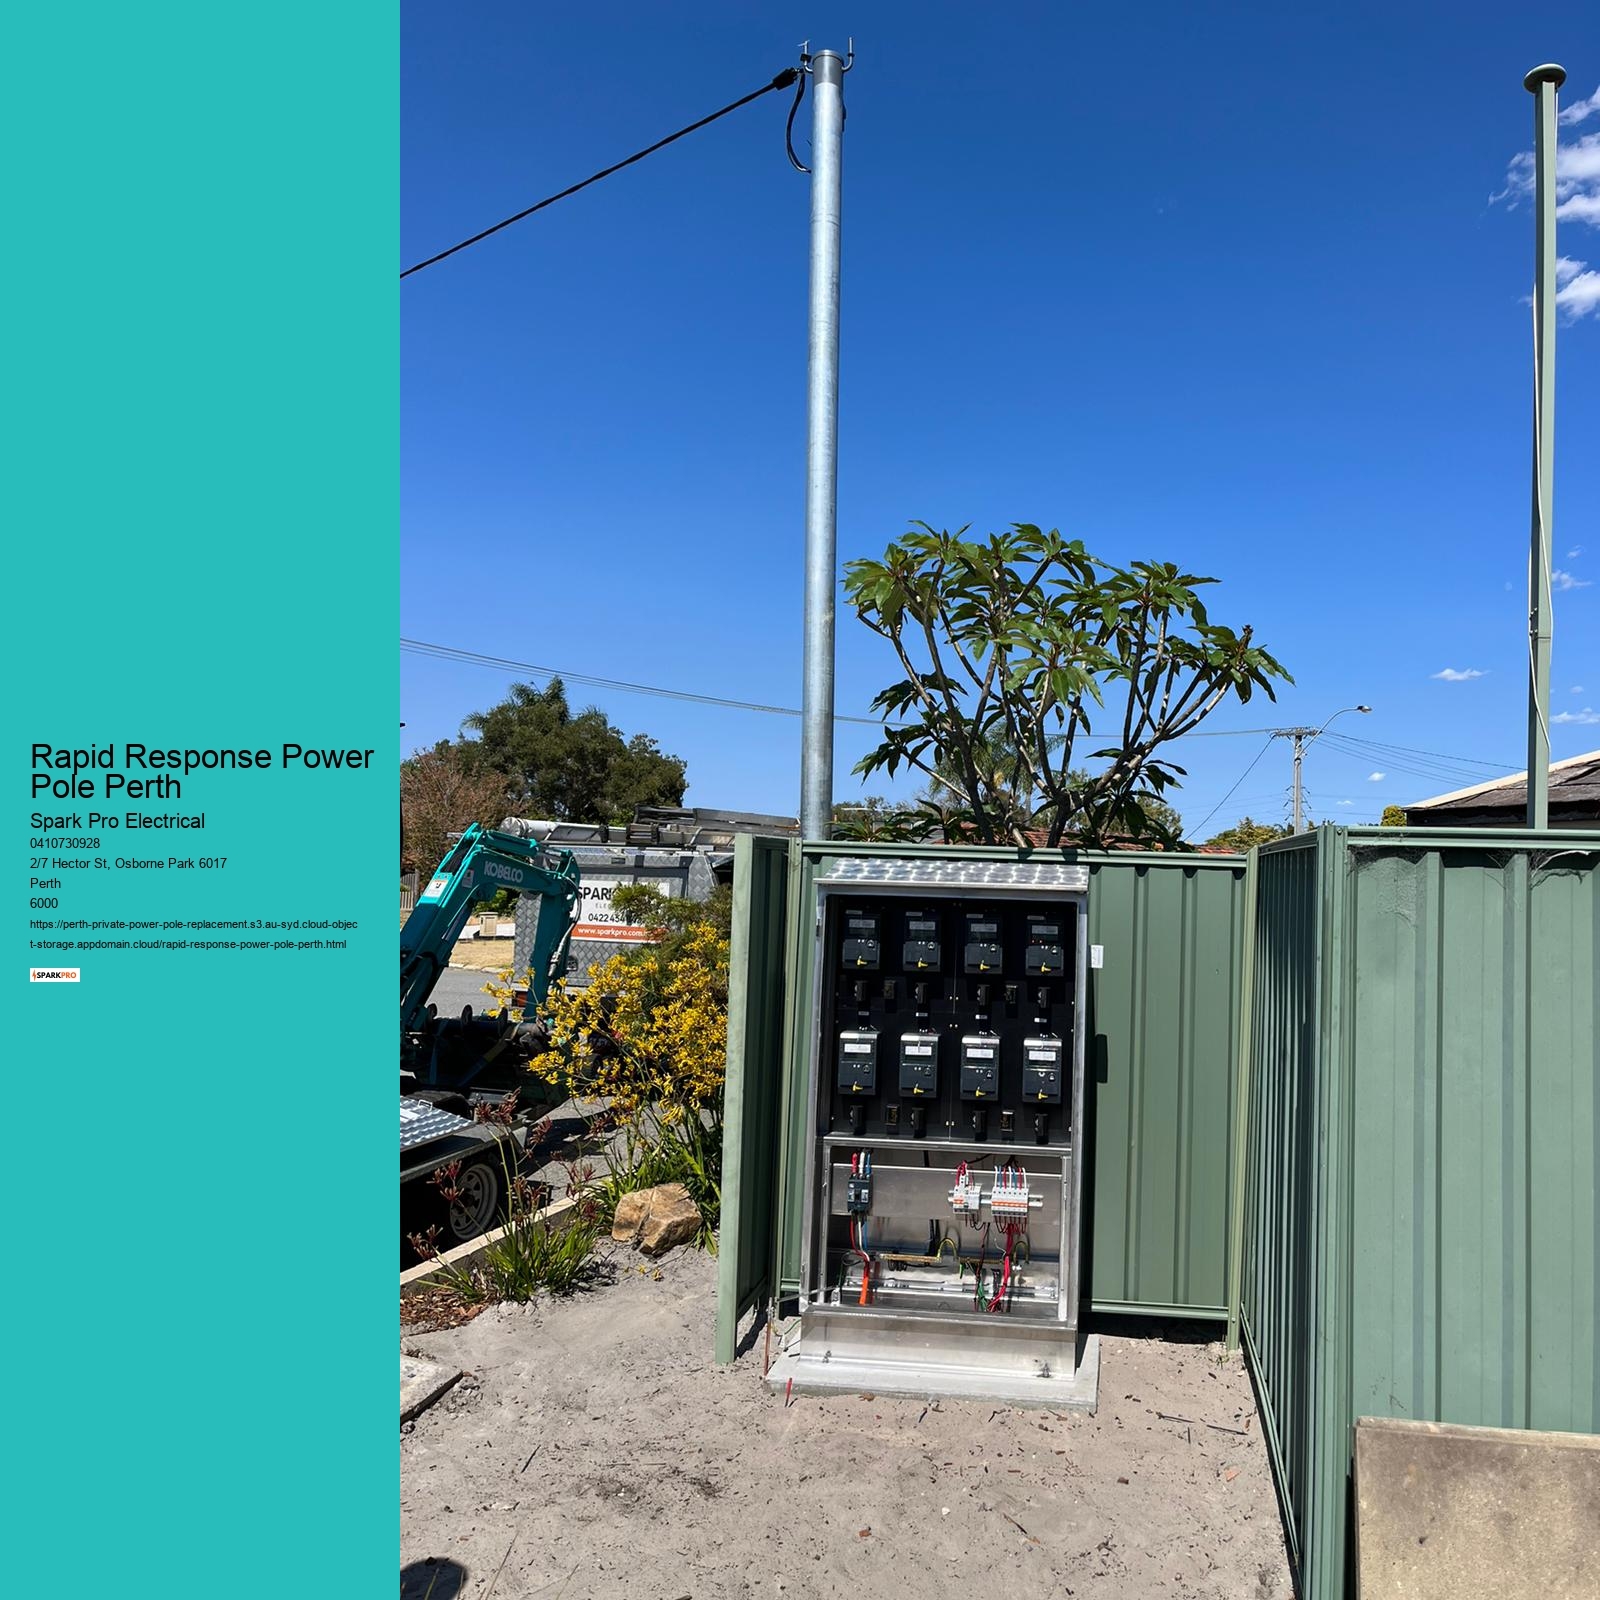 Professional Power Pole Replacement in Perth